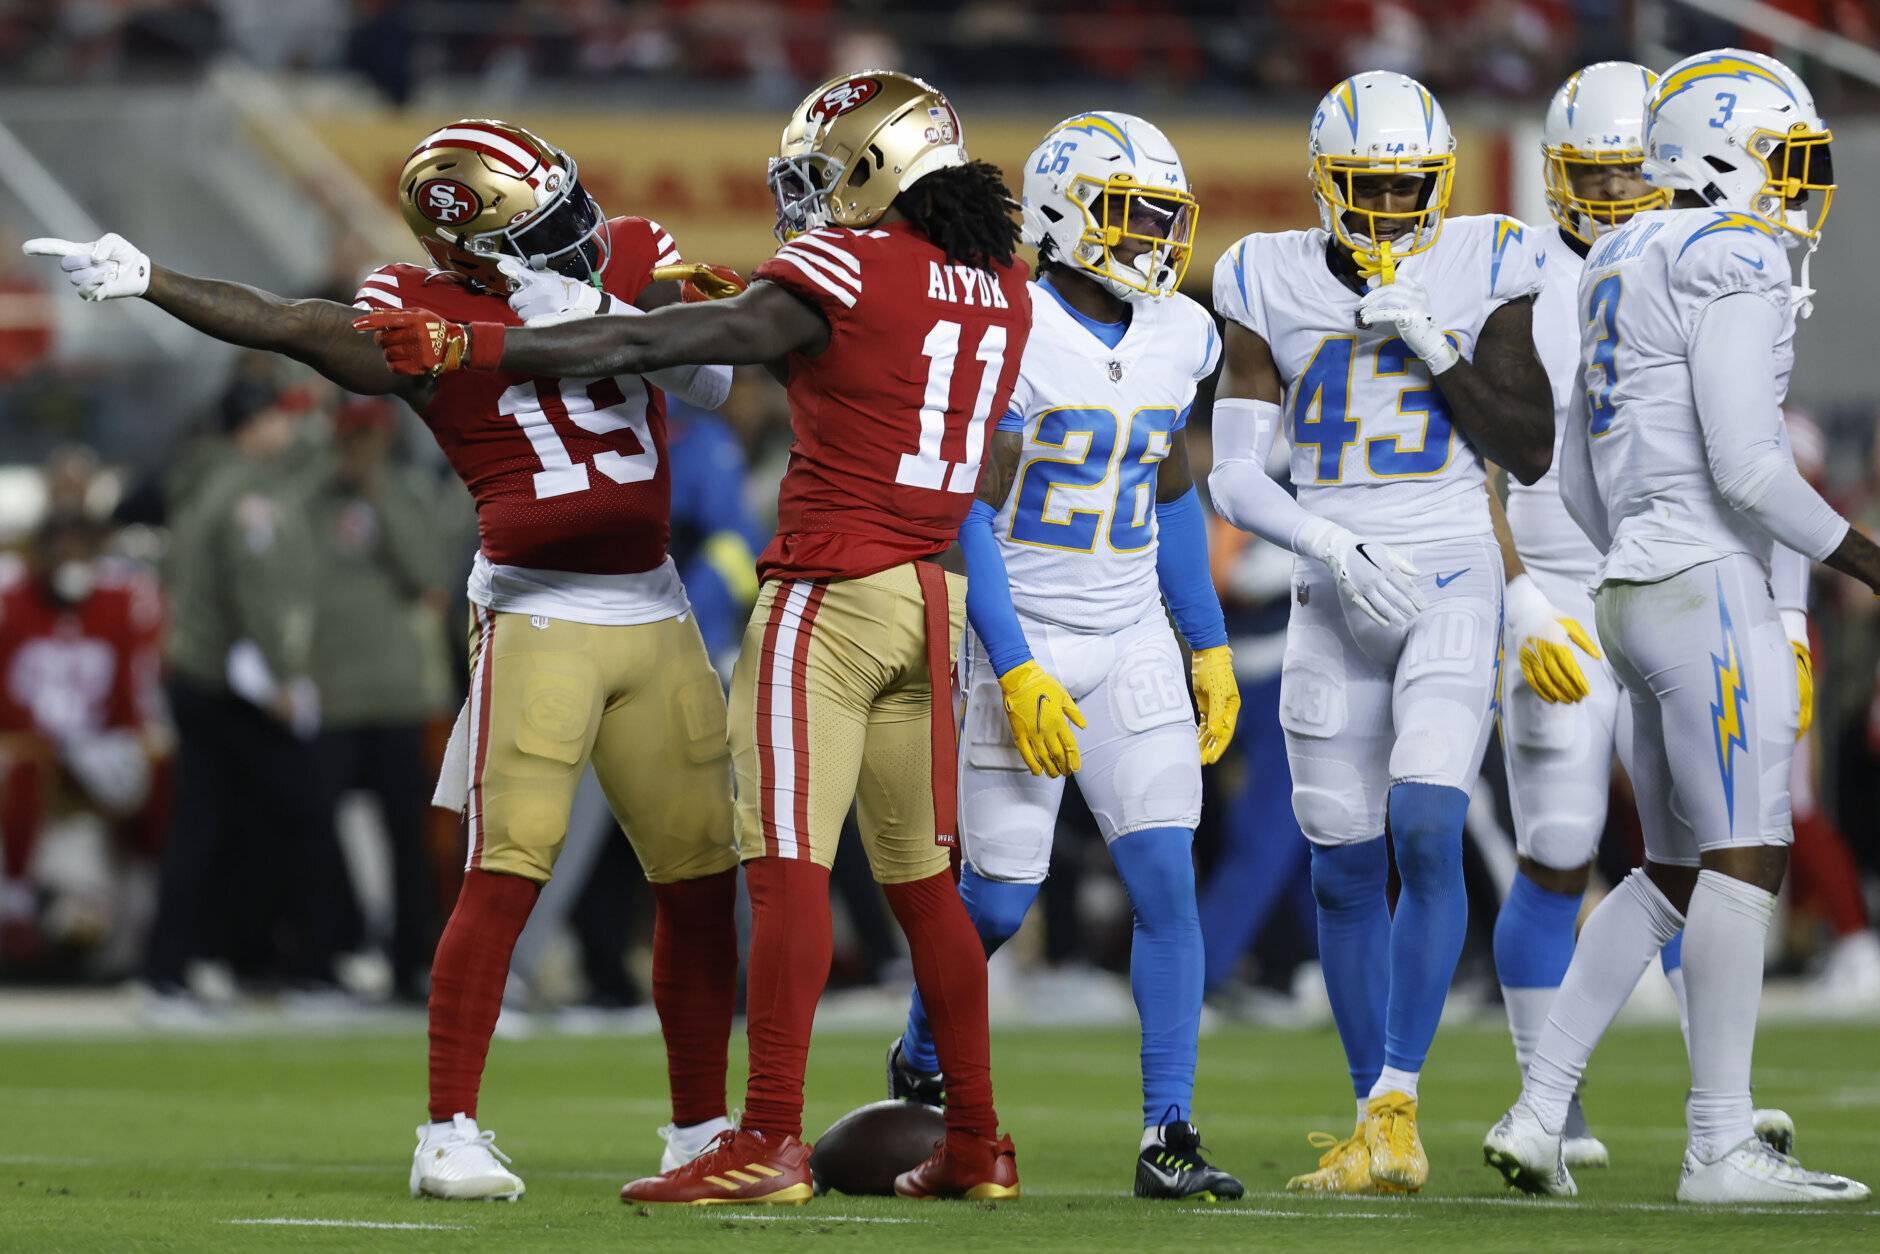 <p><b><i>Chargers 16</i></b><br />
<b><i>49ers 22</i></b></p>
<p>On <a href="https://profootballtalk.nbcsports.com/2022/11/08/bosa-family-closing-in-on-100-combined-sacks-with-joey-and-nick-meeting-sunday-night/" target="_blank" rel="noopener">a banner night for the Bosa family</a>, the Niners got their season pointed in the right direction by outrushing the Chargers 156-51 and pulling within a half-game of Seattle for the NFC West lead. San Fran has a chance to pull away in the division if they can take advantage of this stretch of five straight home games (yes, I&#8217;m counting next week&#8217;s game in Mexico City as a &#8220;home&#8221; game).</p>
